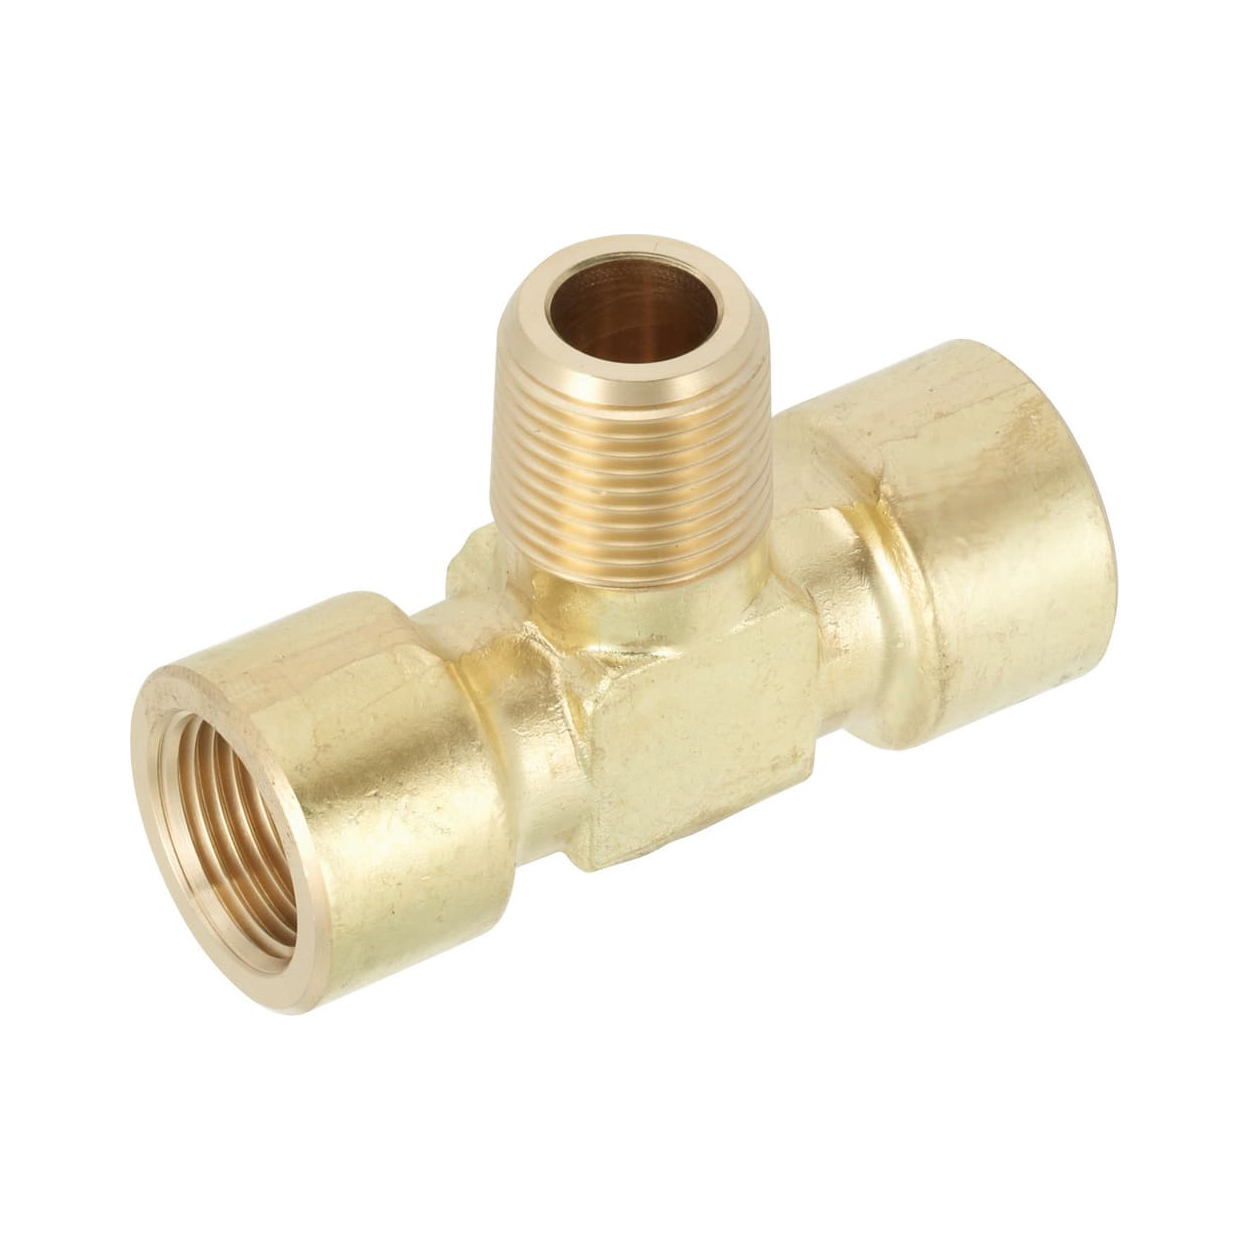 Brass Fittings for Steel Pipe / Tee / Threaded / Tapped SJSXT6A